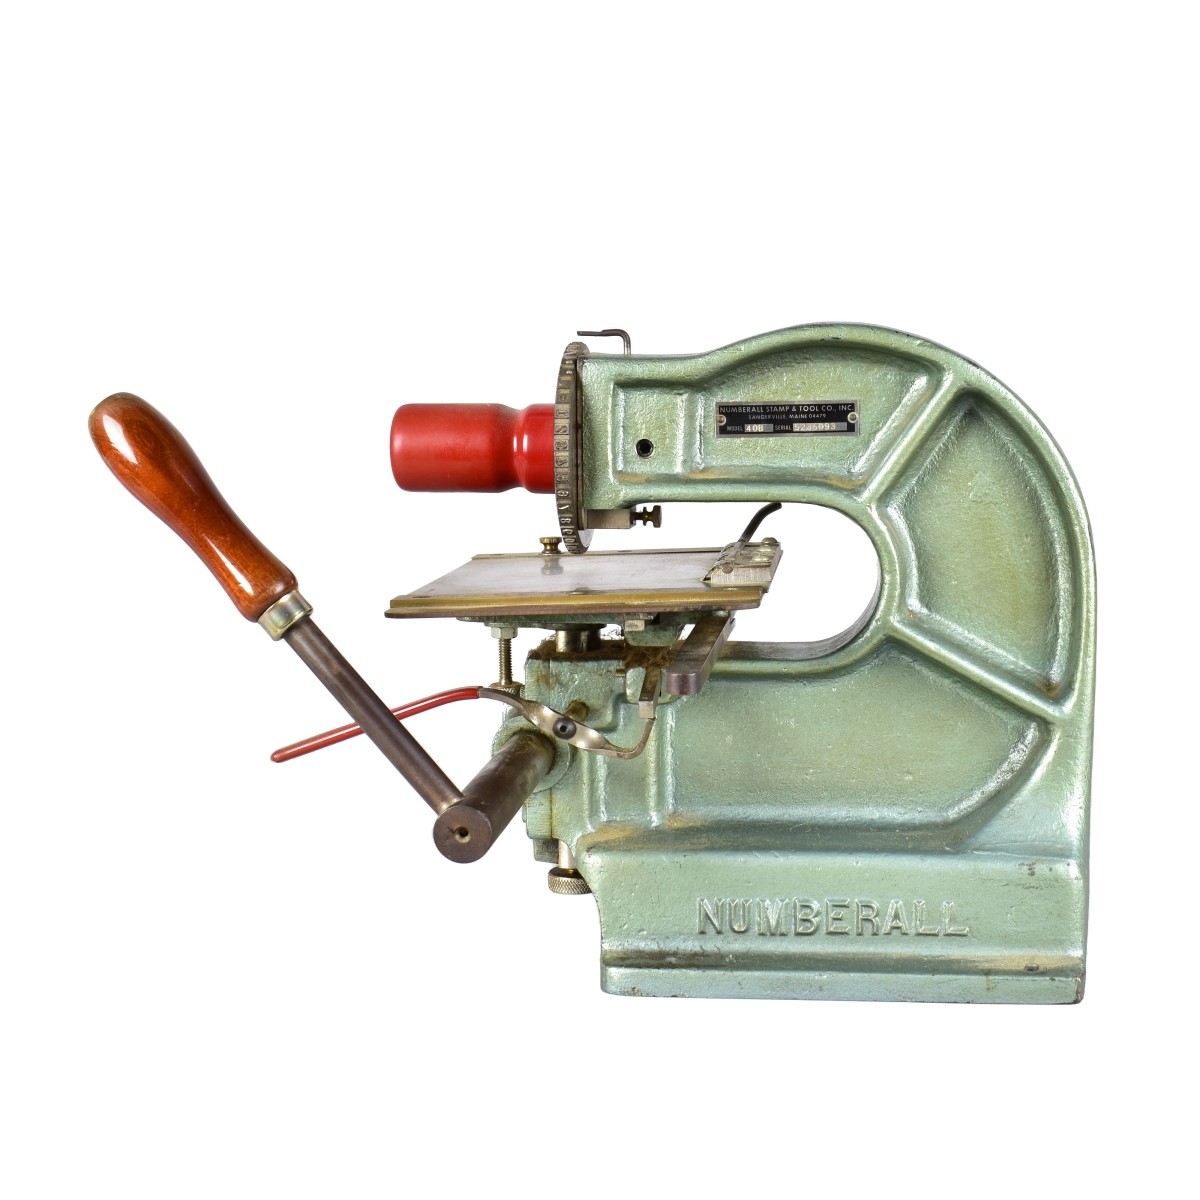 Numberall Stamp & Tool Co. Stamping Machine Press